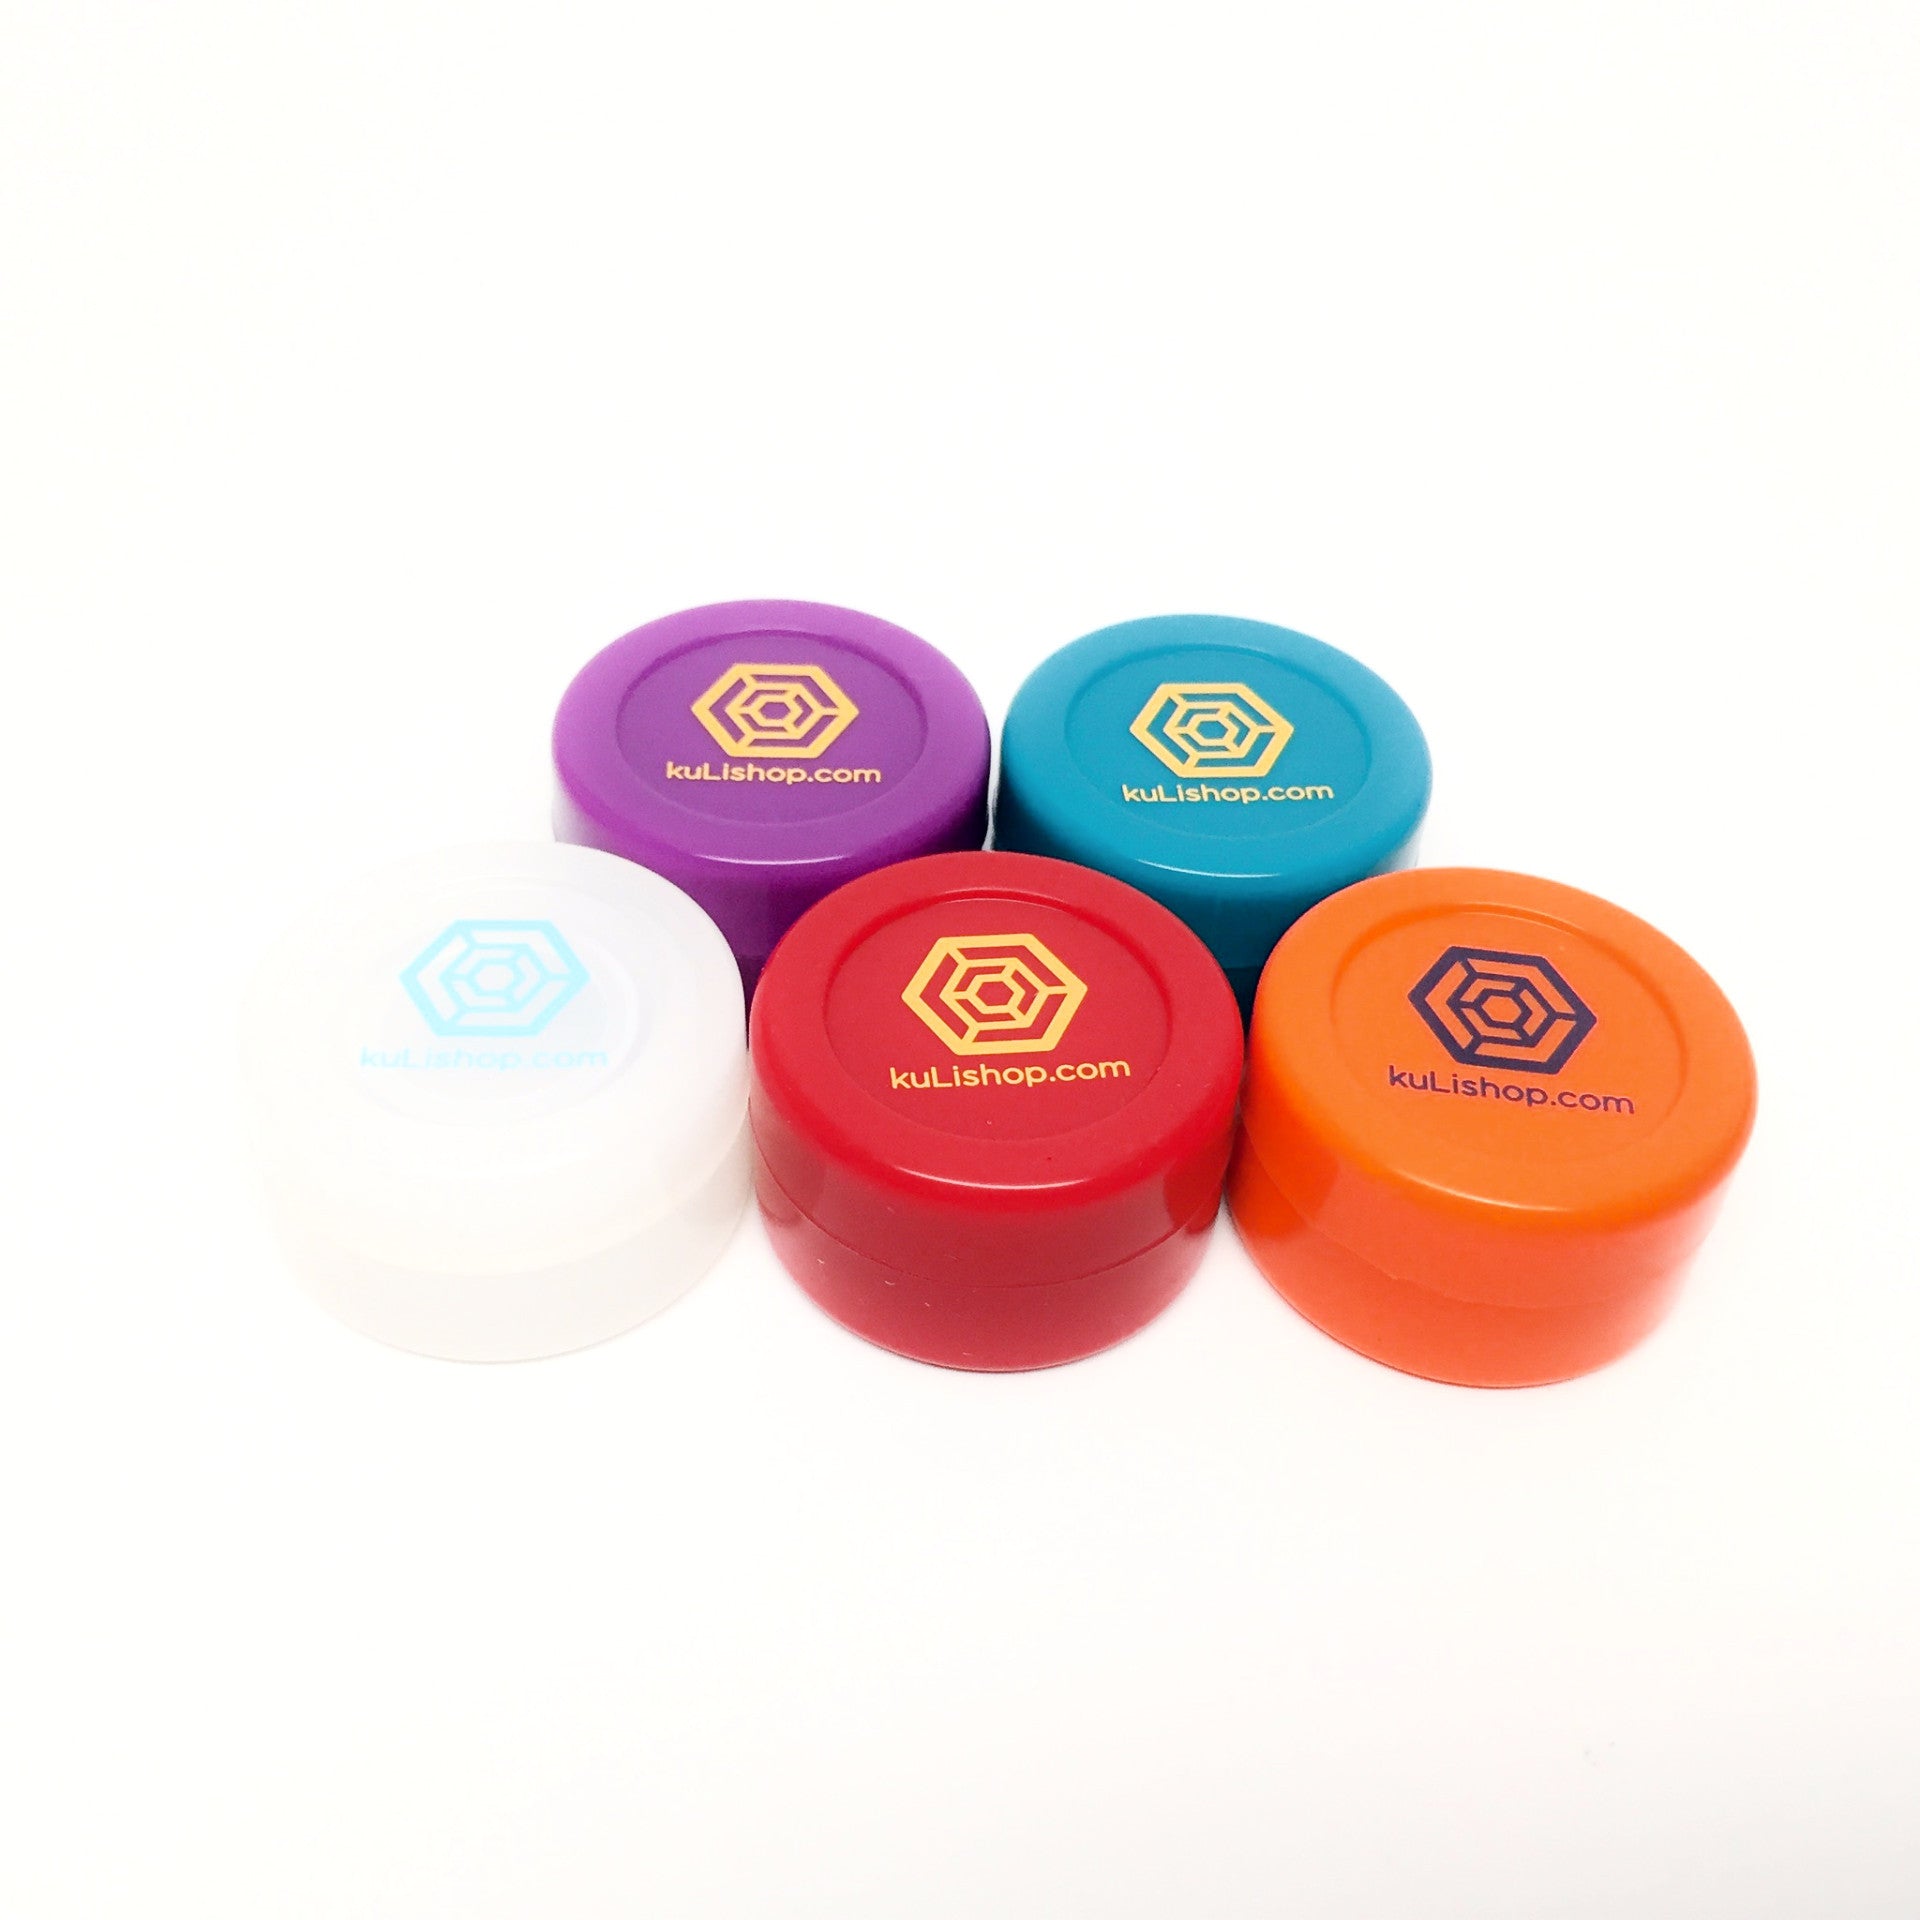 Silicone Puck Container Rolling Papers & Supplies